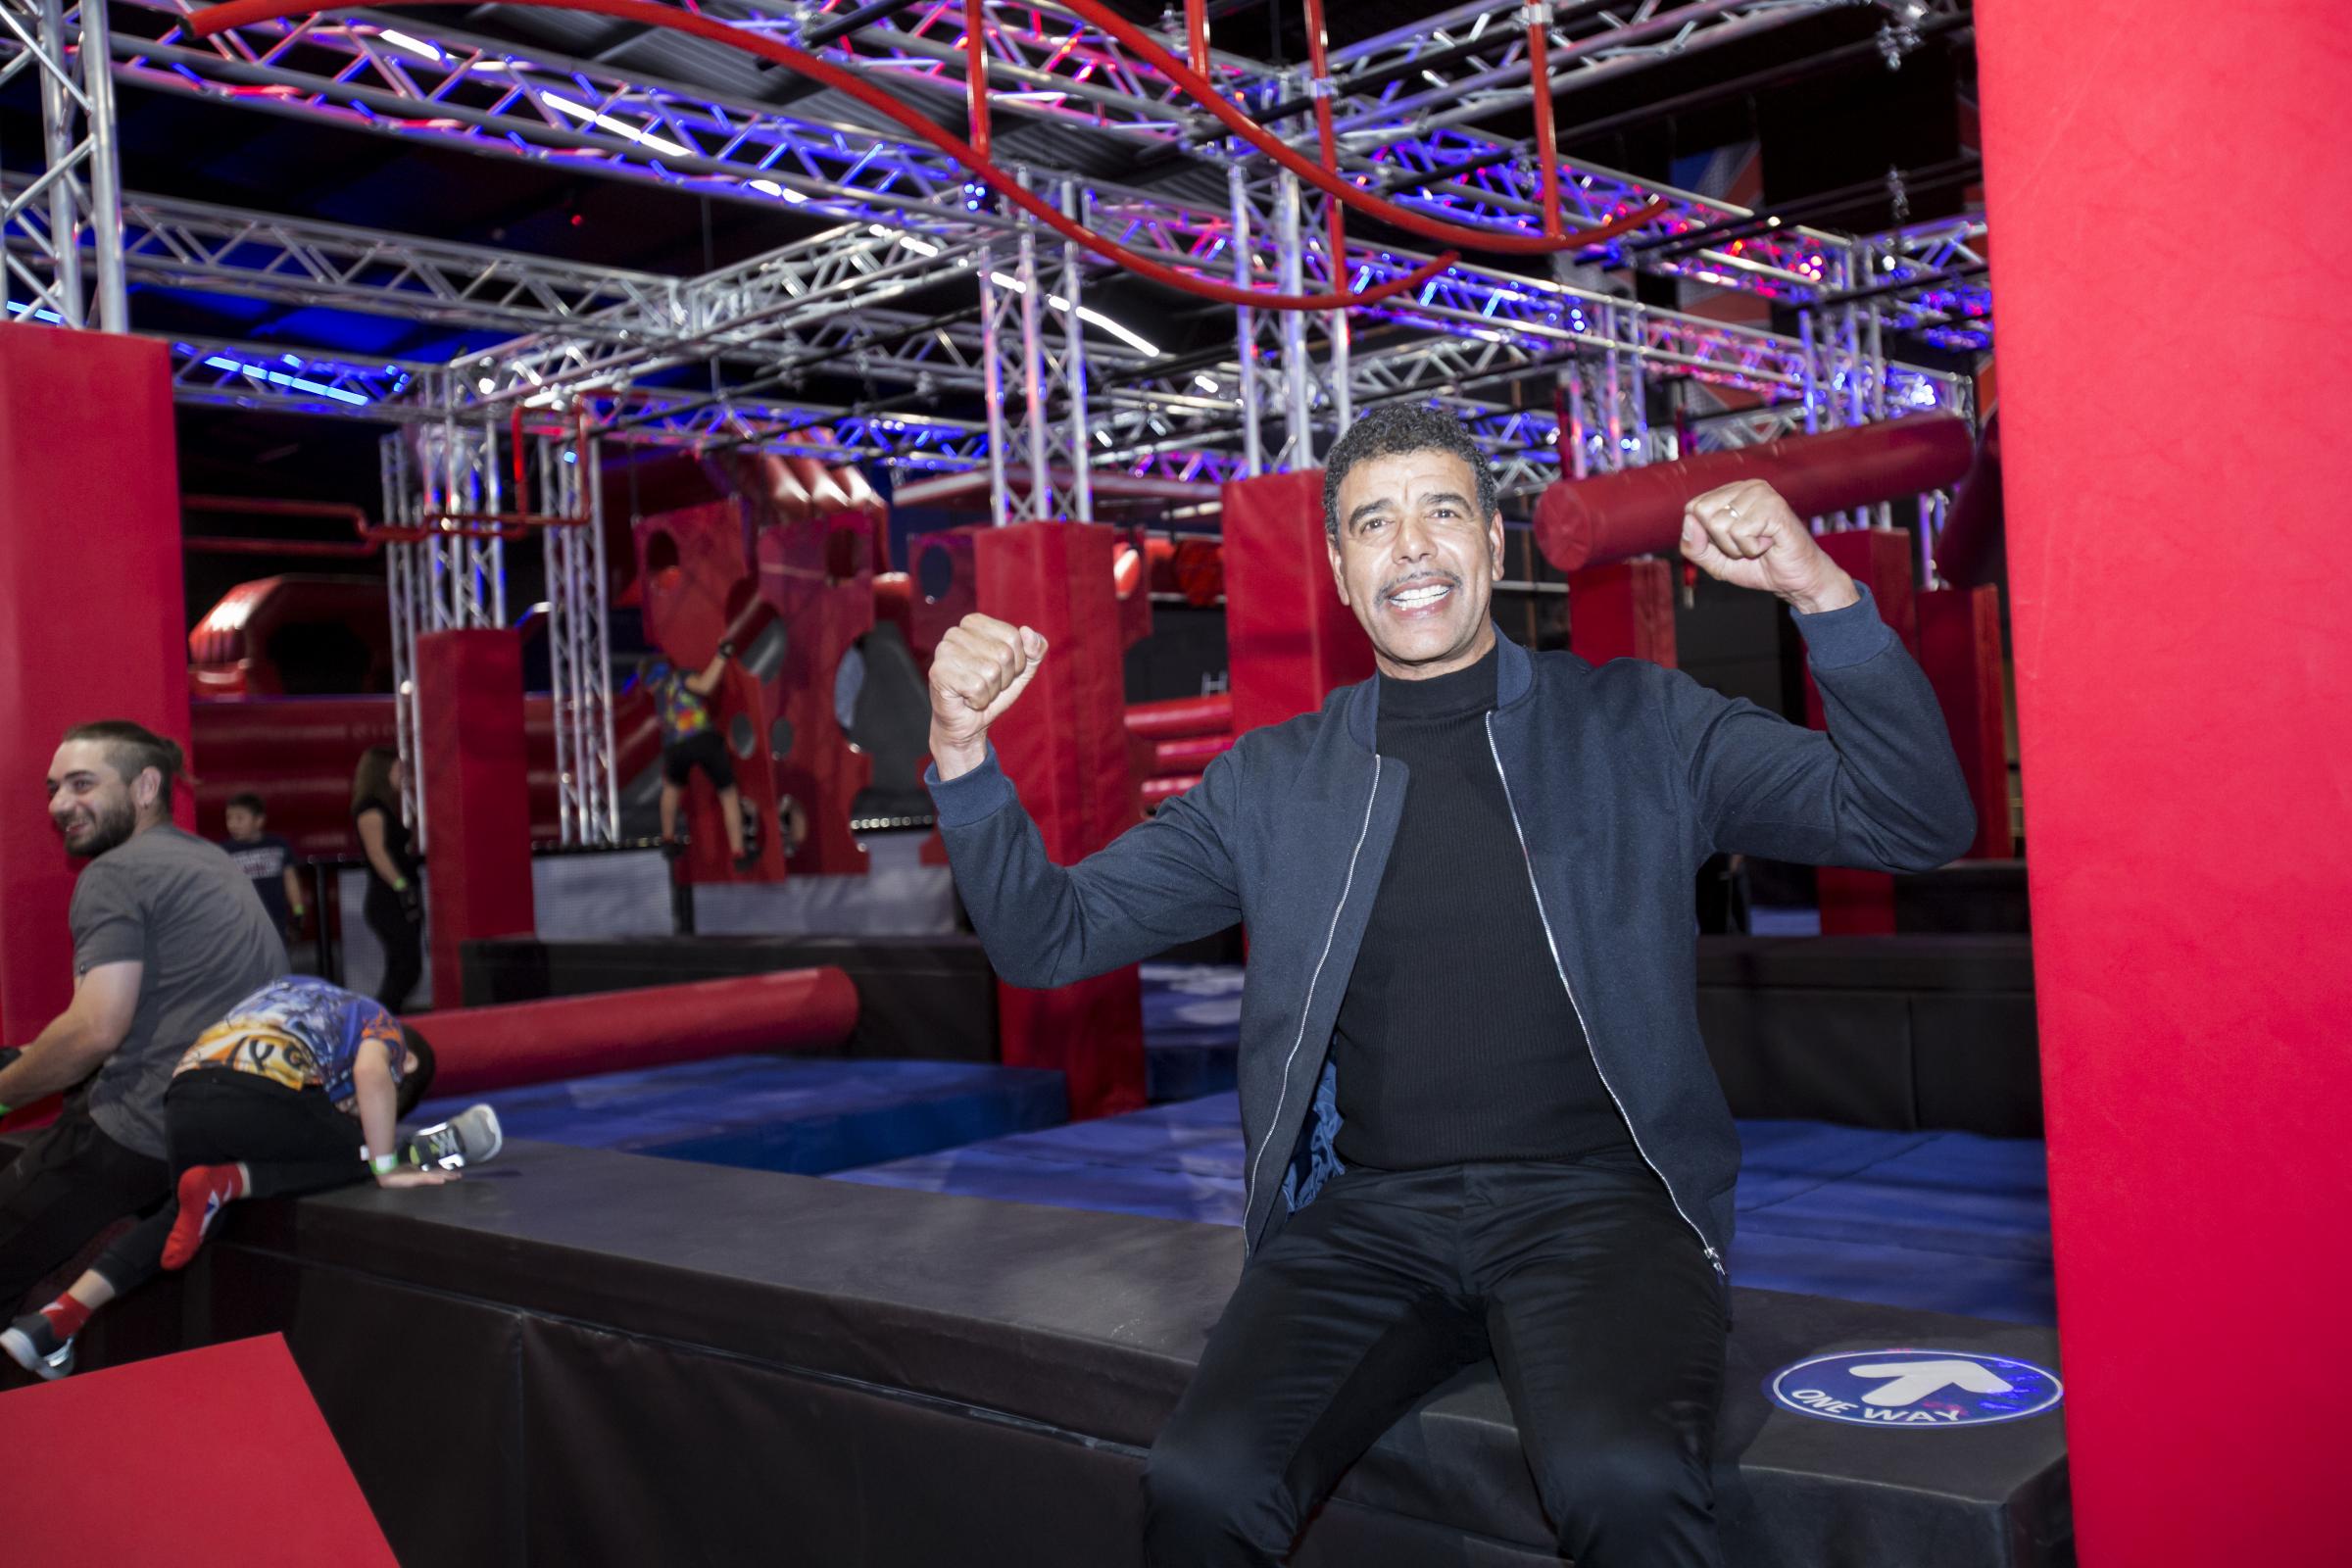 Ninja Warrior presenter Chris Kamara will be there to welcome the first few guests